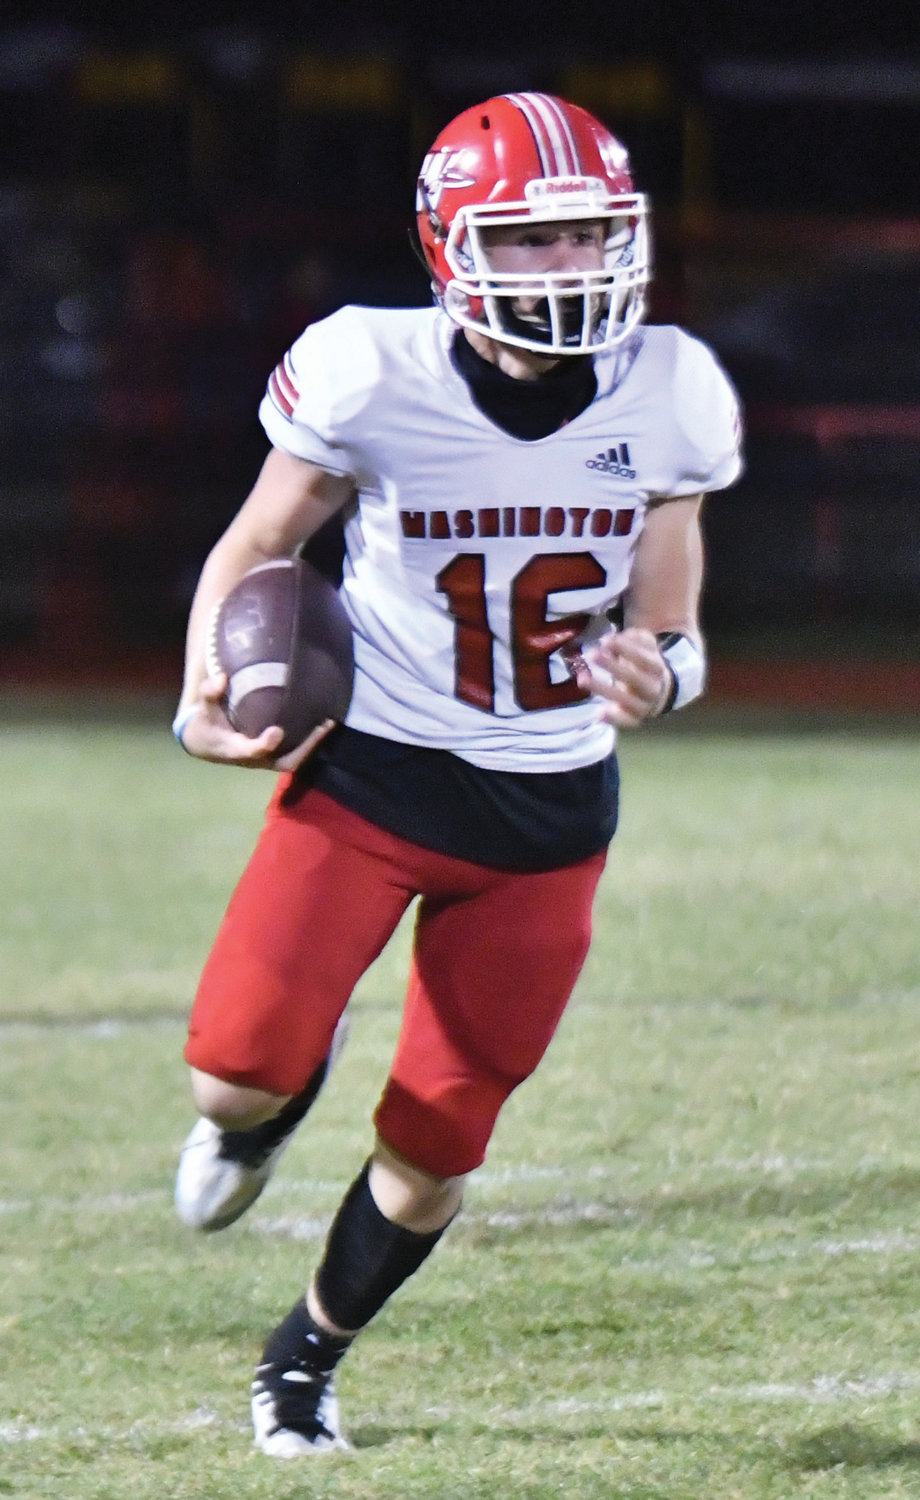 Washington freshman Kale Brakefield runs on a carry during the Warriors’ 55-6 win over Comanche last Friday. Washington squares off against Little Axe tonight (Thursday) after the homecoming coronation.